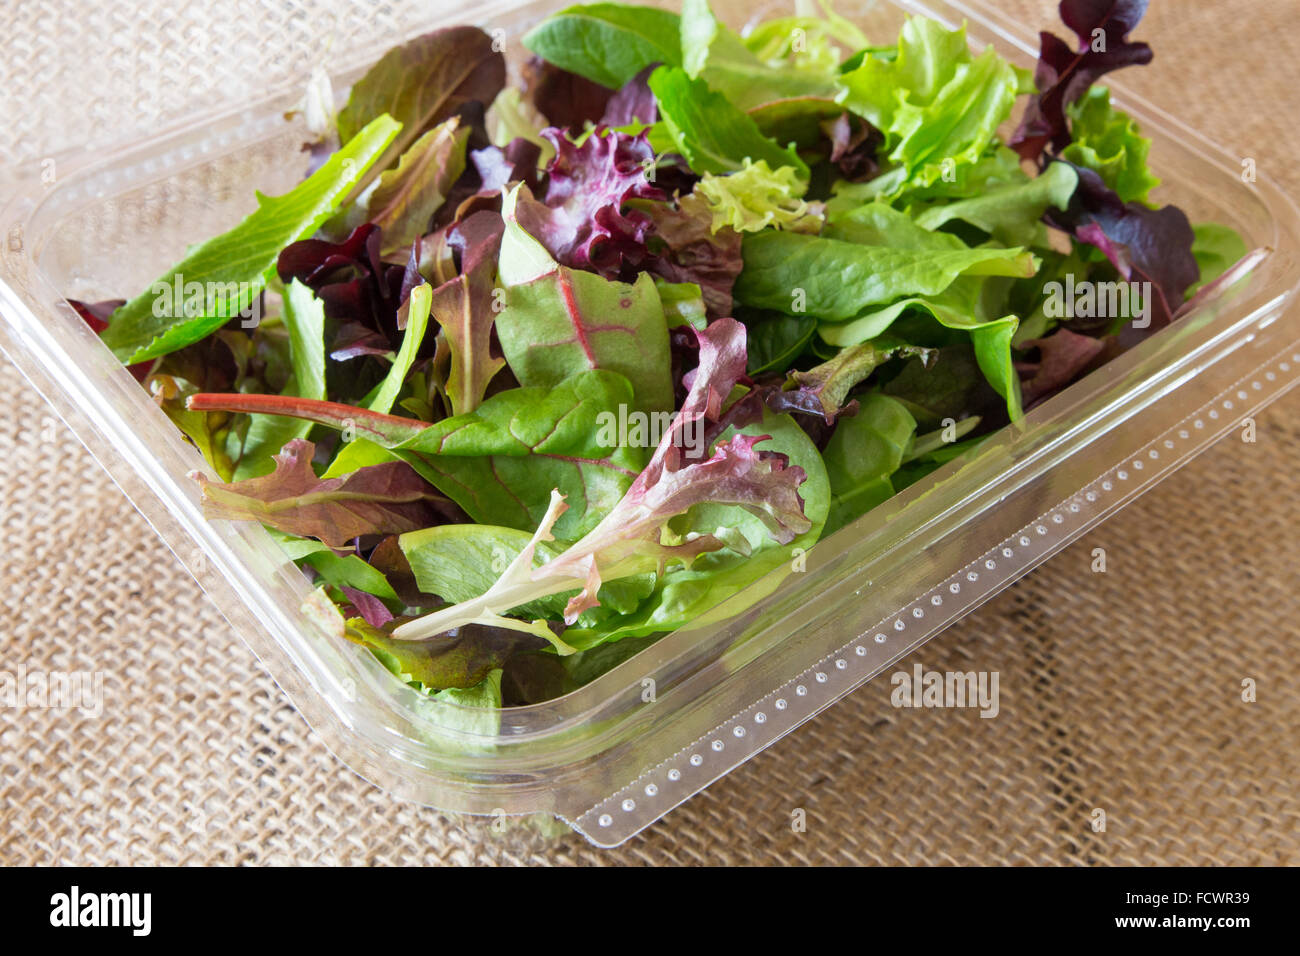 https://c8.alamy.com/comp/FCWR39/spring-greens-salad-mix-in-plastic-container-FCWR39.jpg